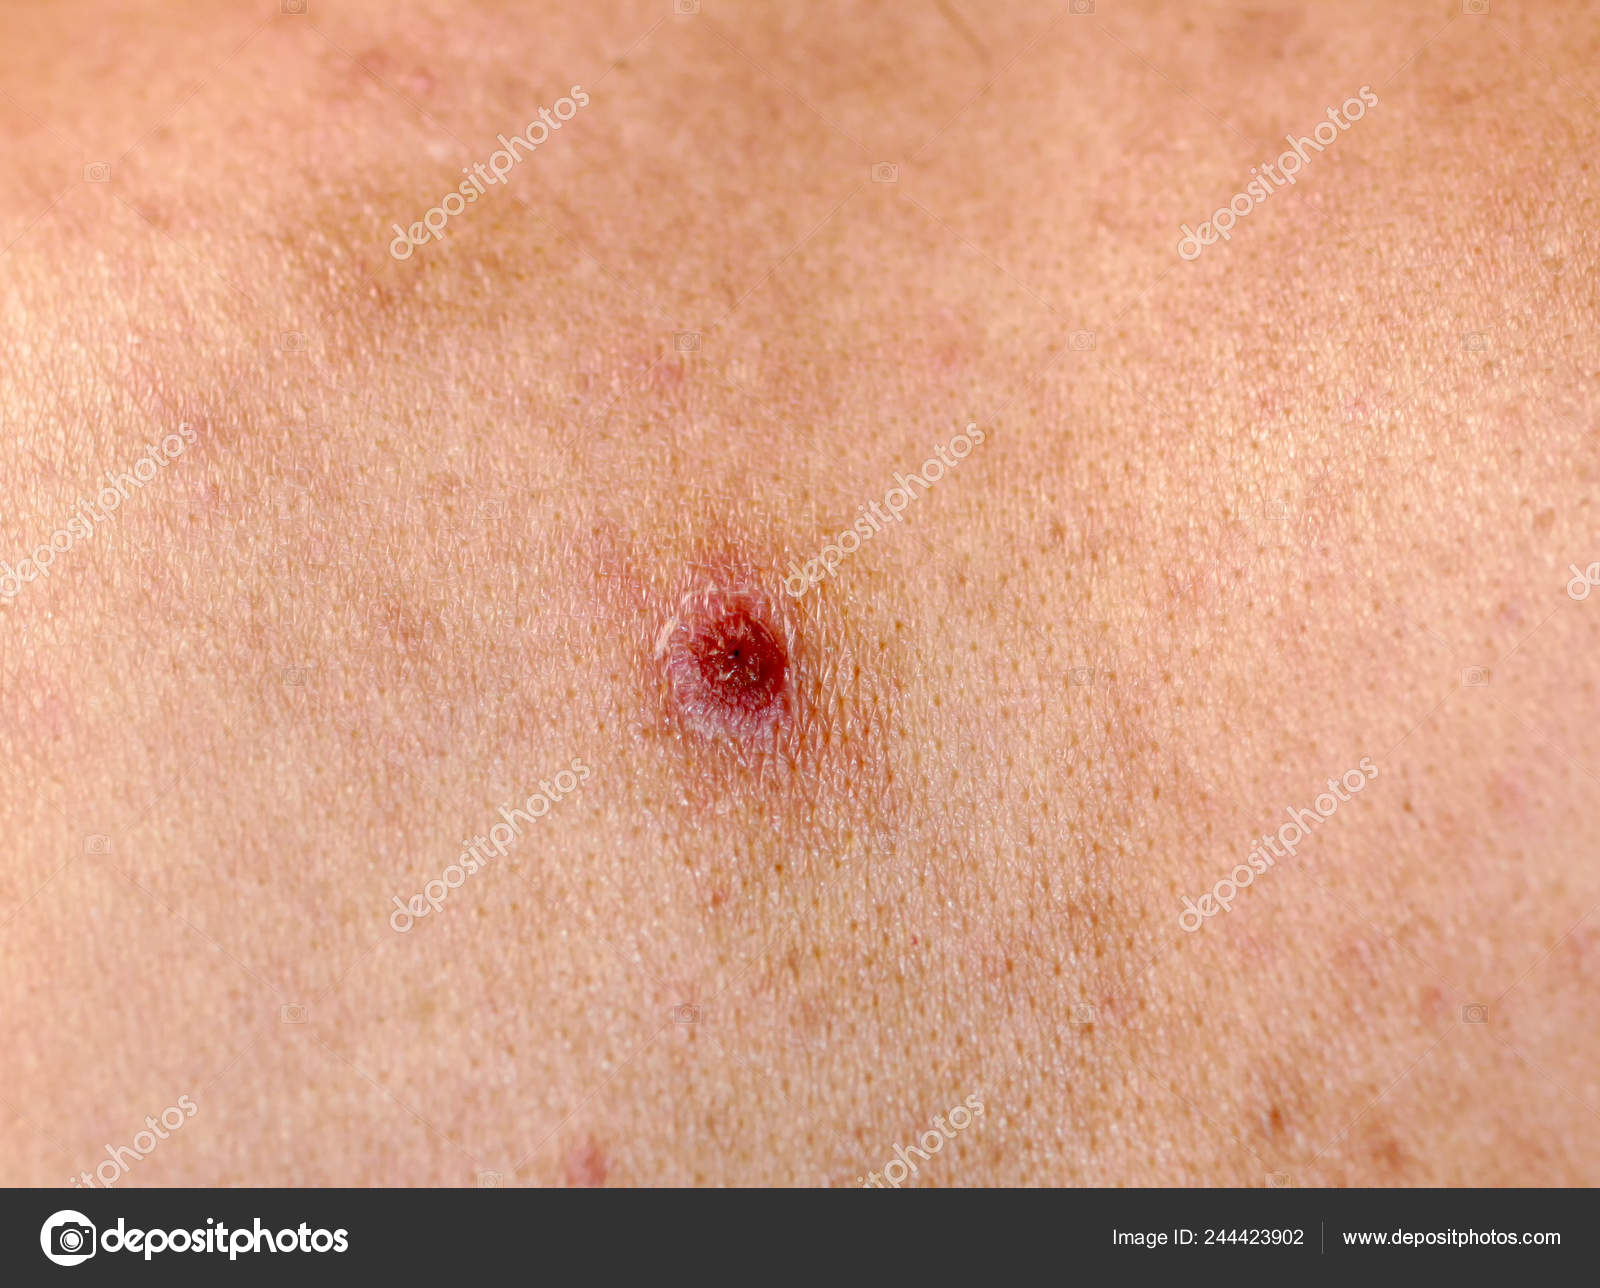 Torn off a bleeding pimple on the skin. Inflammation, acne. Stock Photo by  ©mikrostoker 244423902